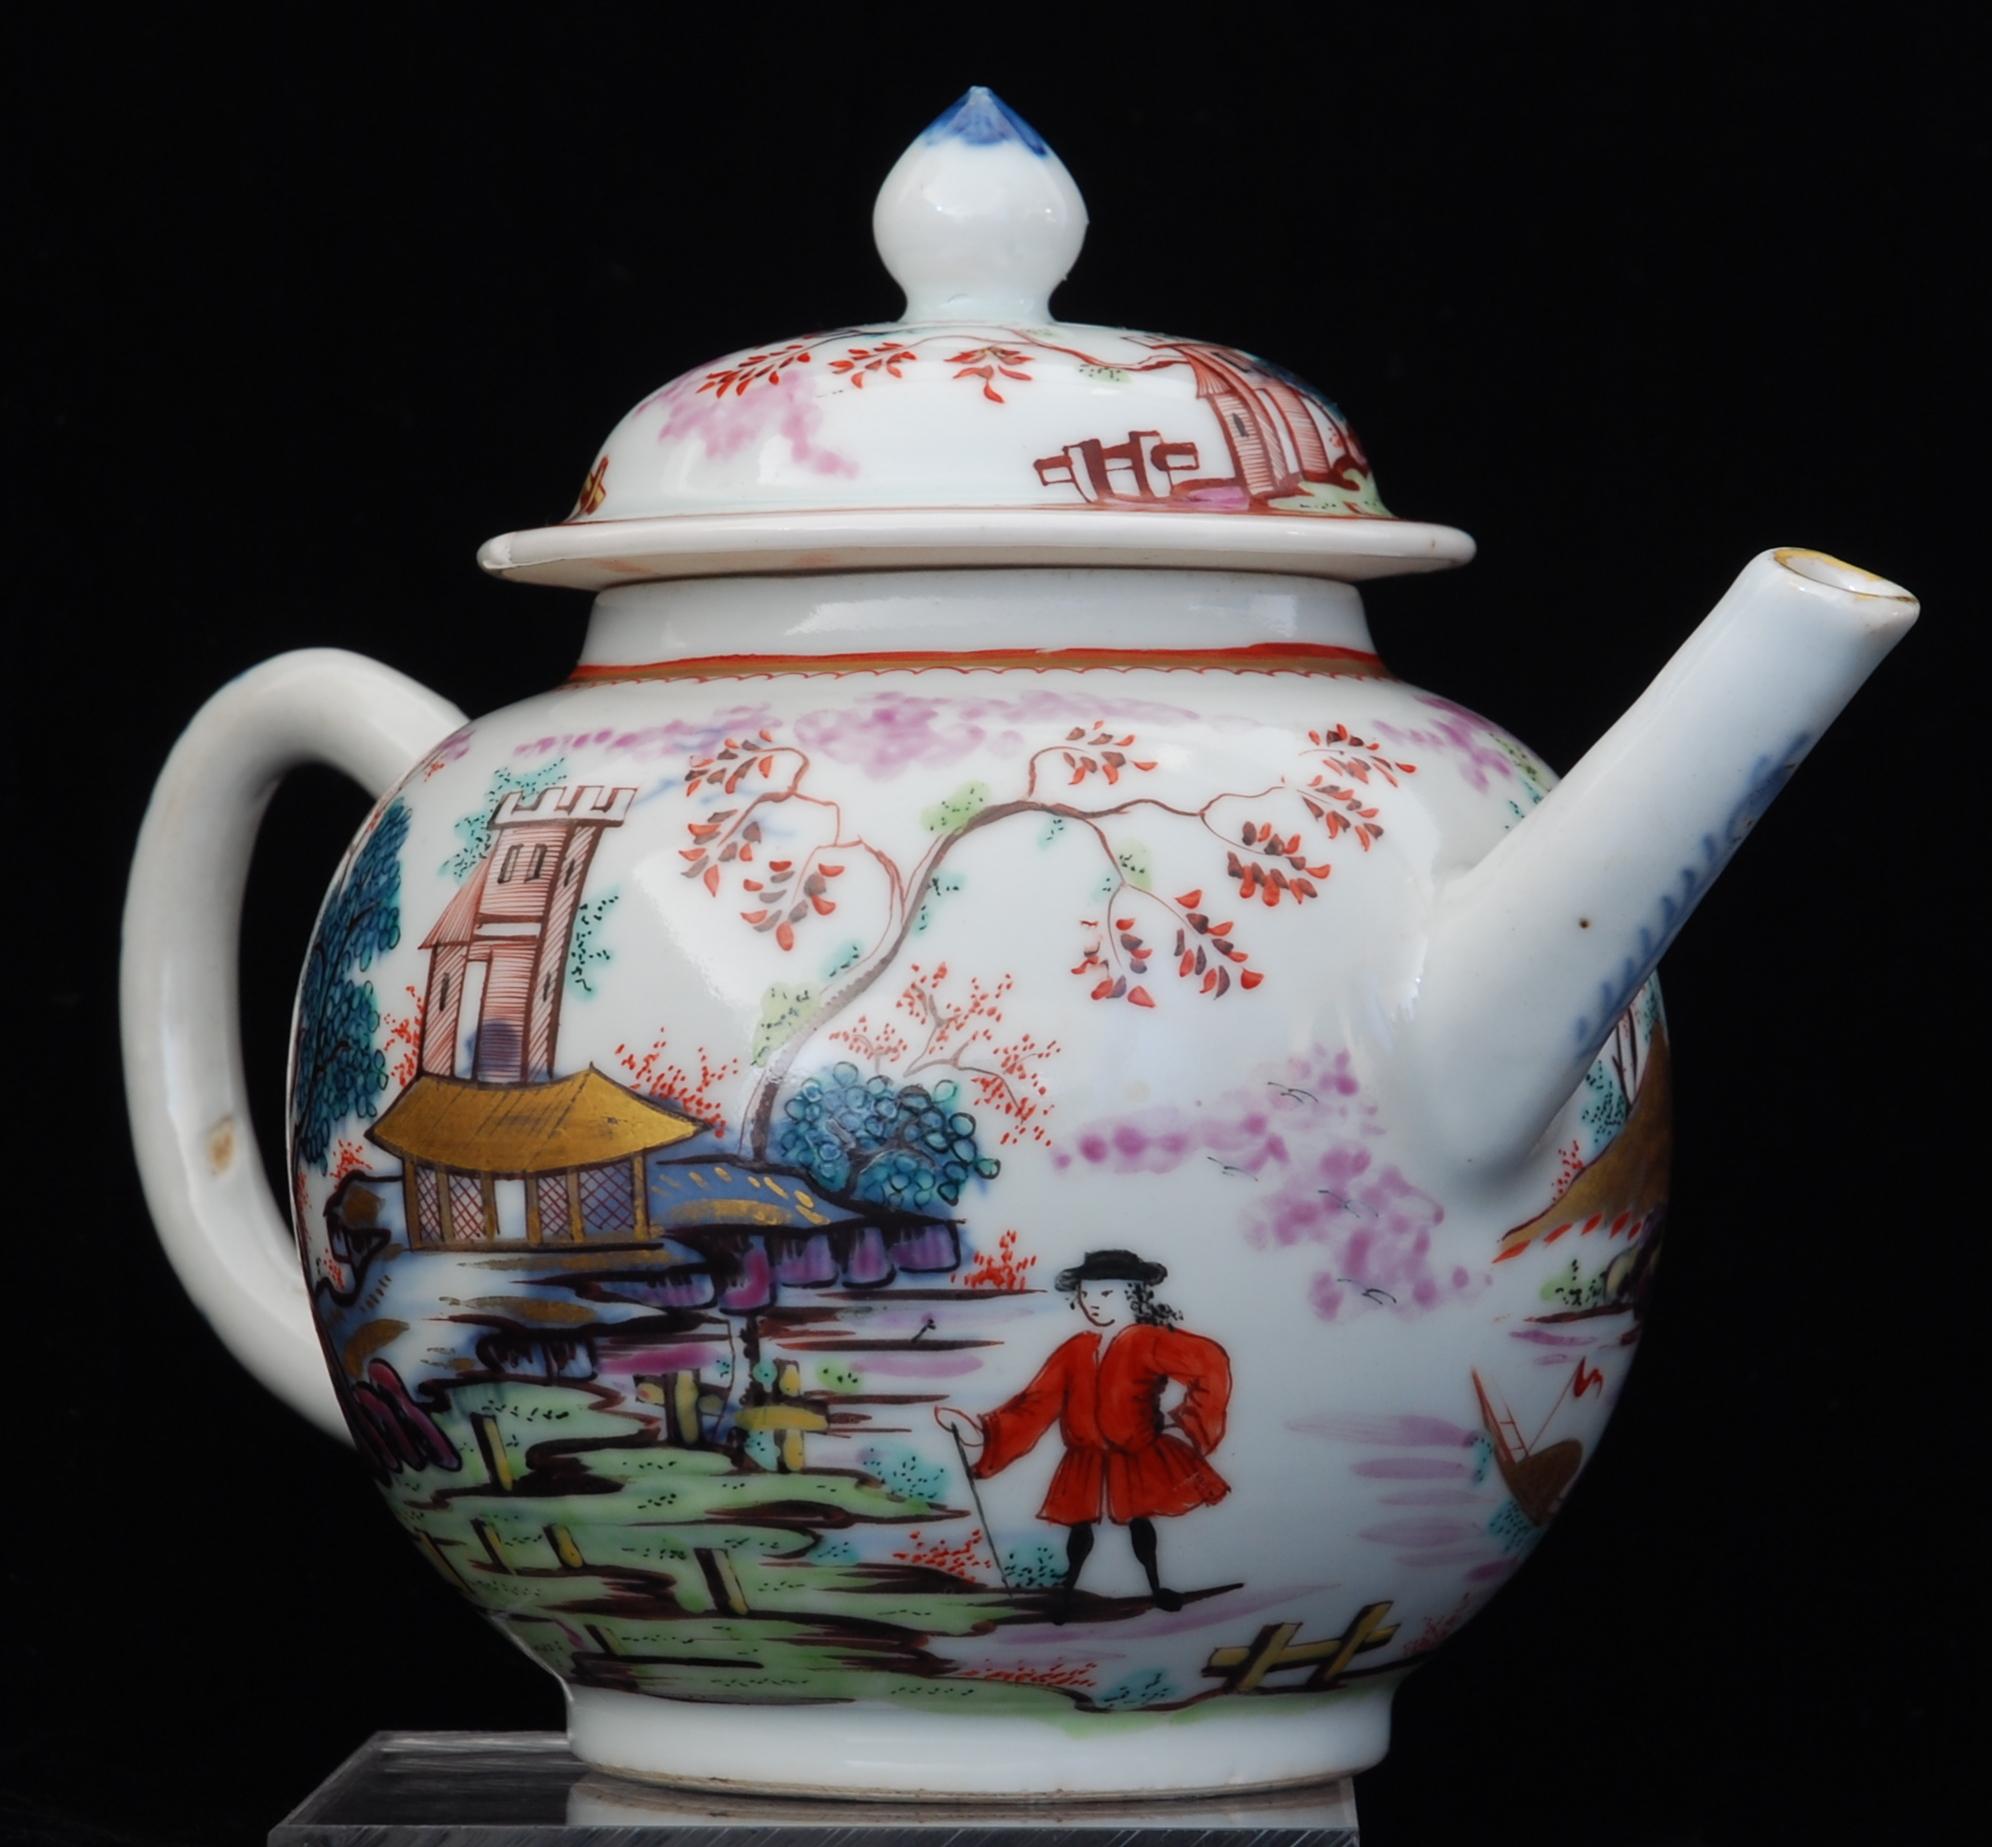 Teapot, Red Coat Pattern, China, circa 1740, Decorated in London by Giles In Excellent Condition For Sale In Melbourne, Victoria